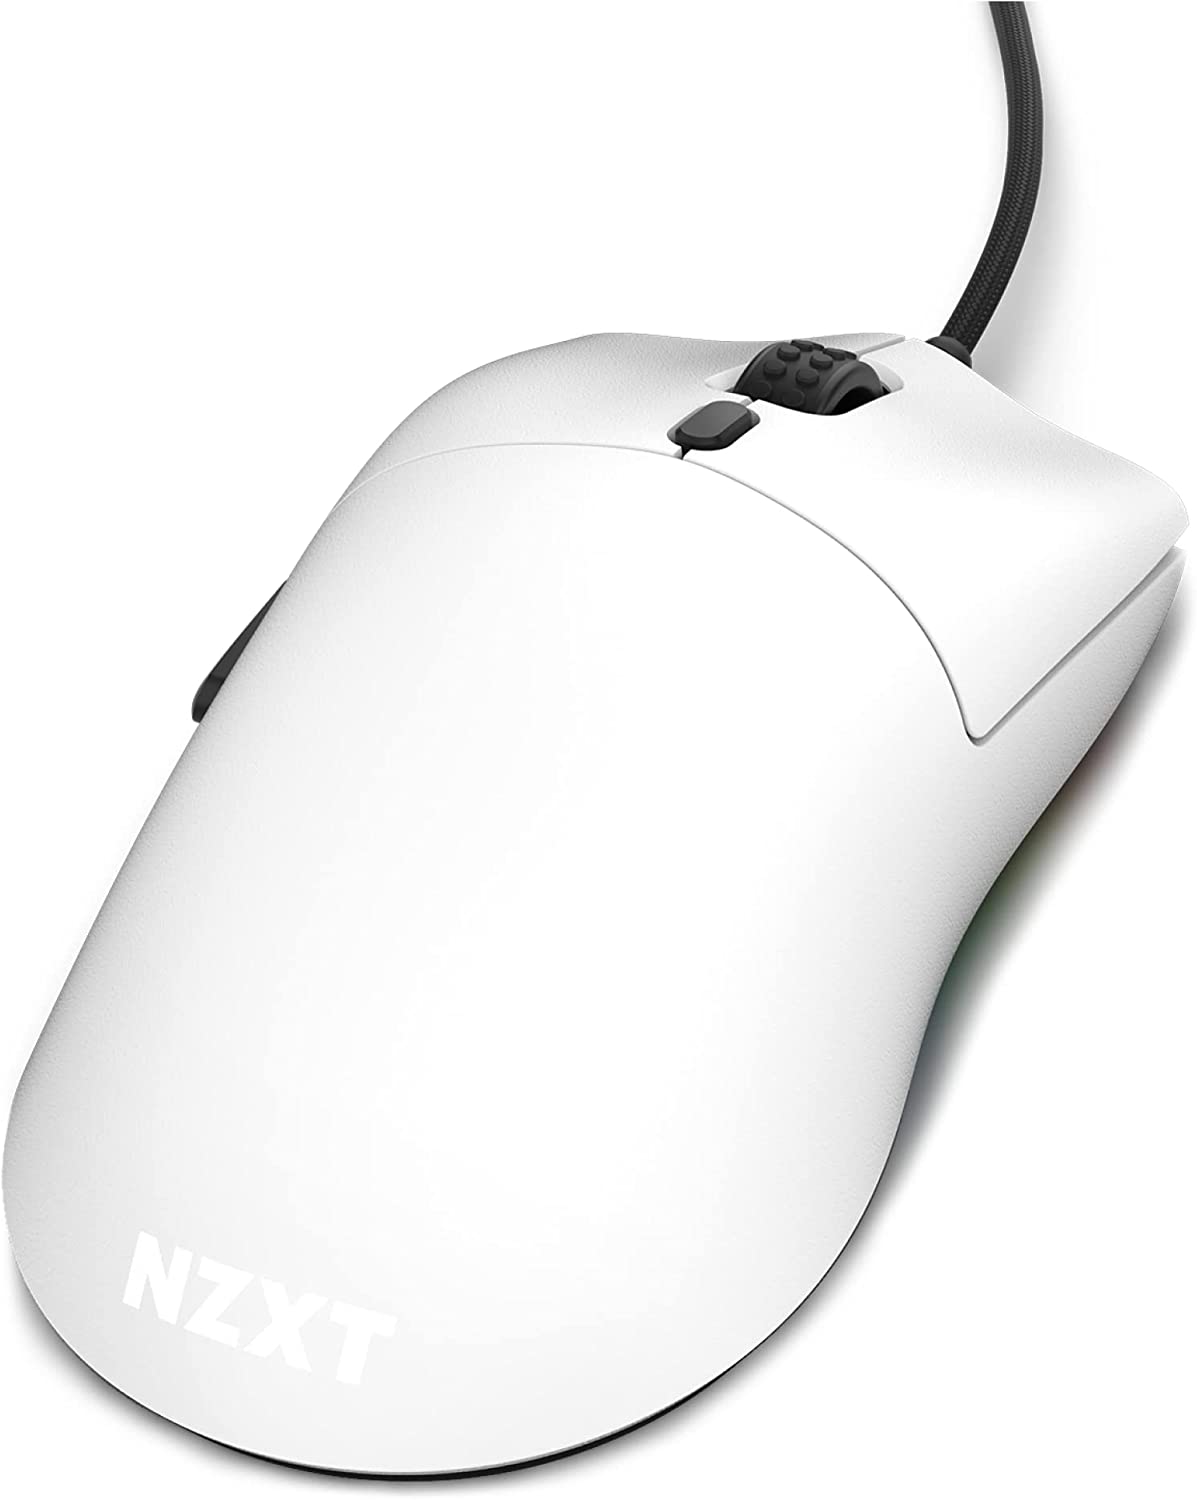 NZXT LIFT LIGHTWEIGHT AMBIDEXTROUS WHITE PC GAMING MOUSE-MOUSE-Makotek Computers